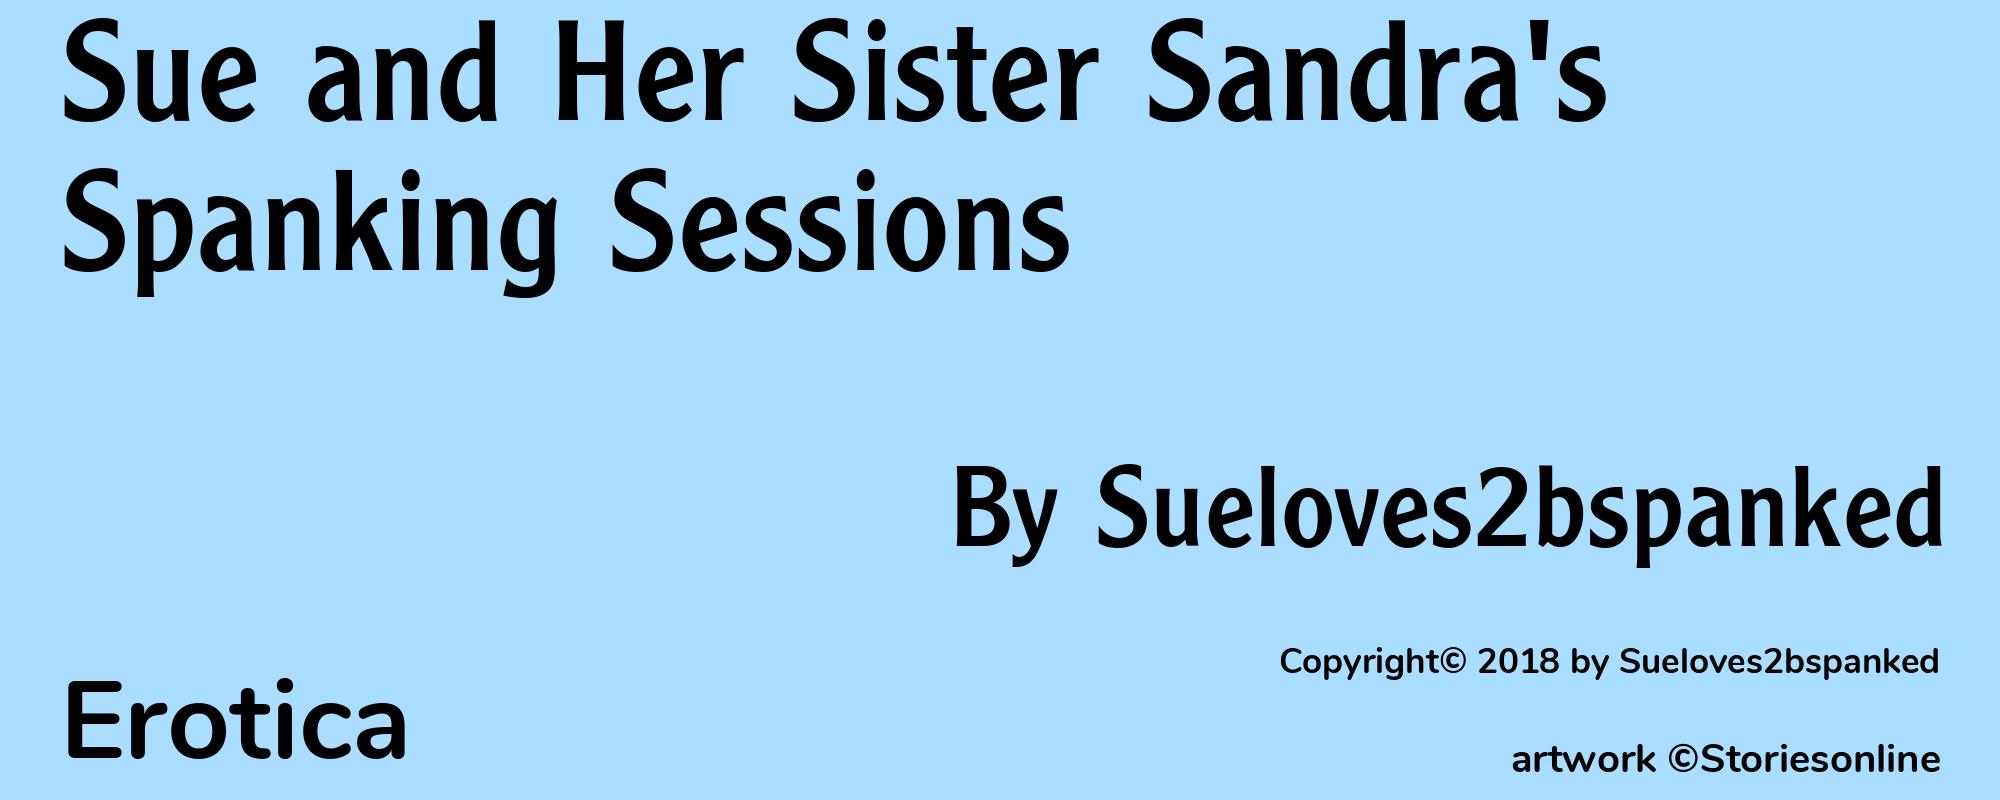 Sue and Her Sister Sandra's Spanking Sessions - Cover